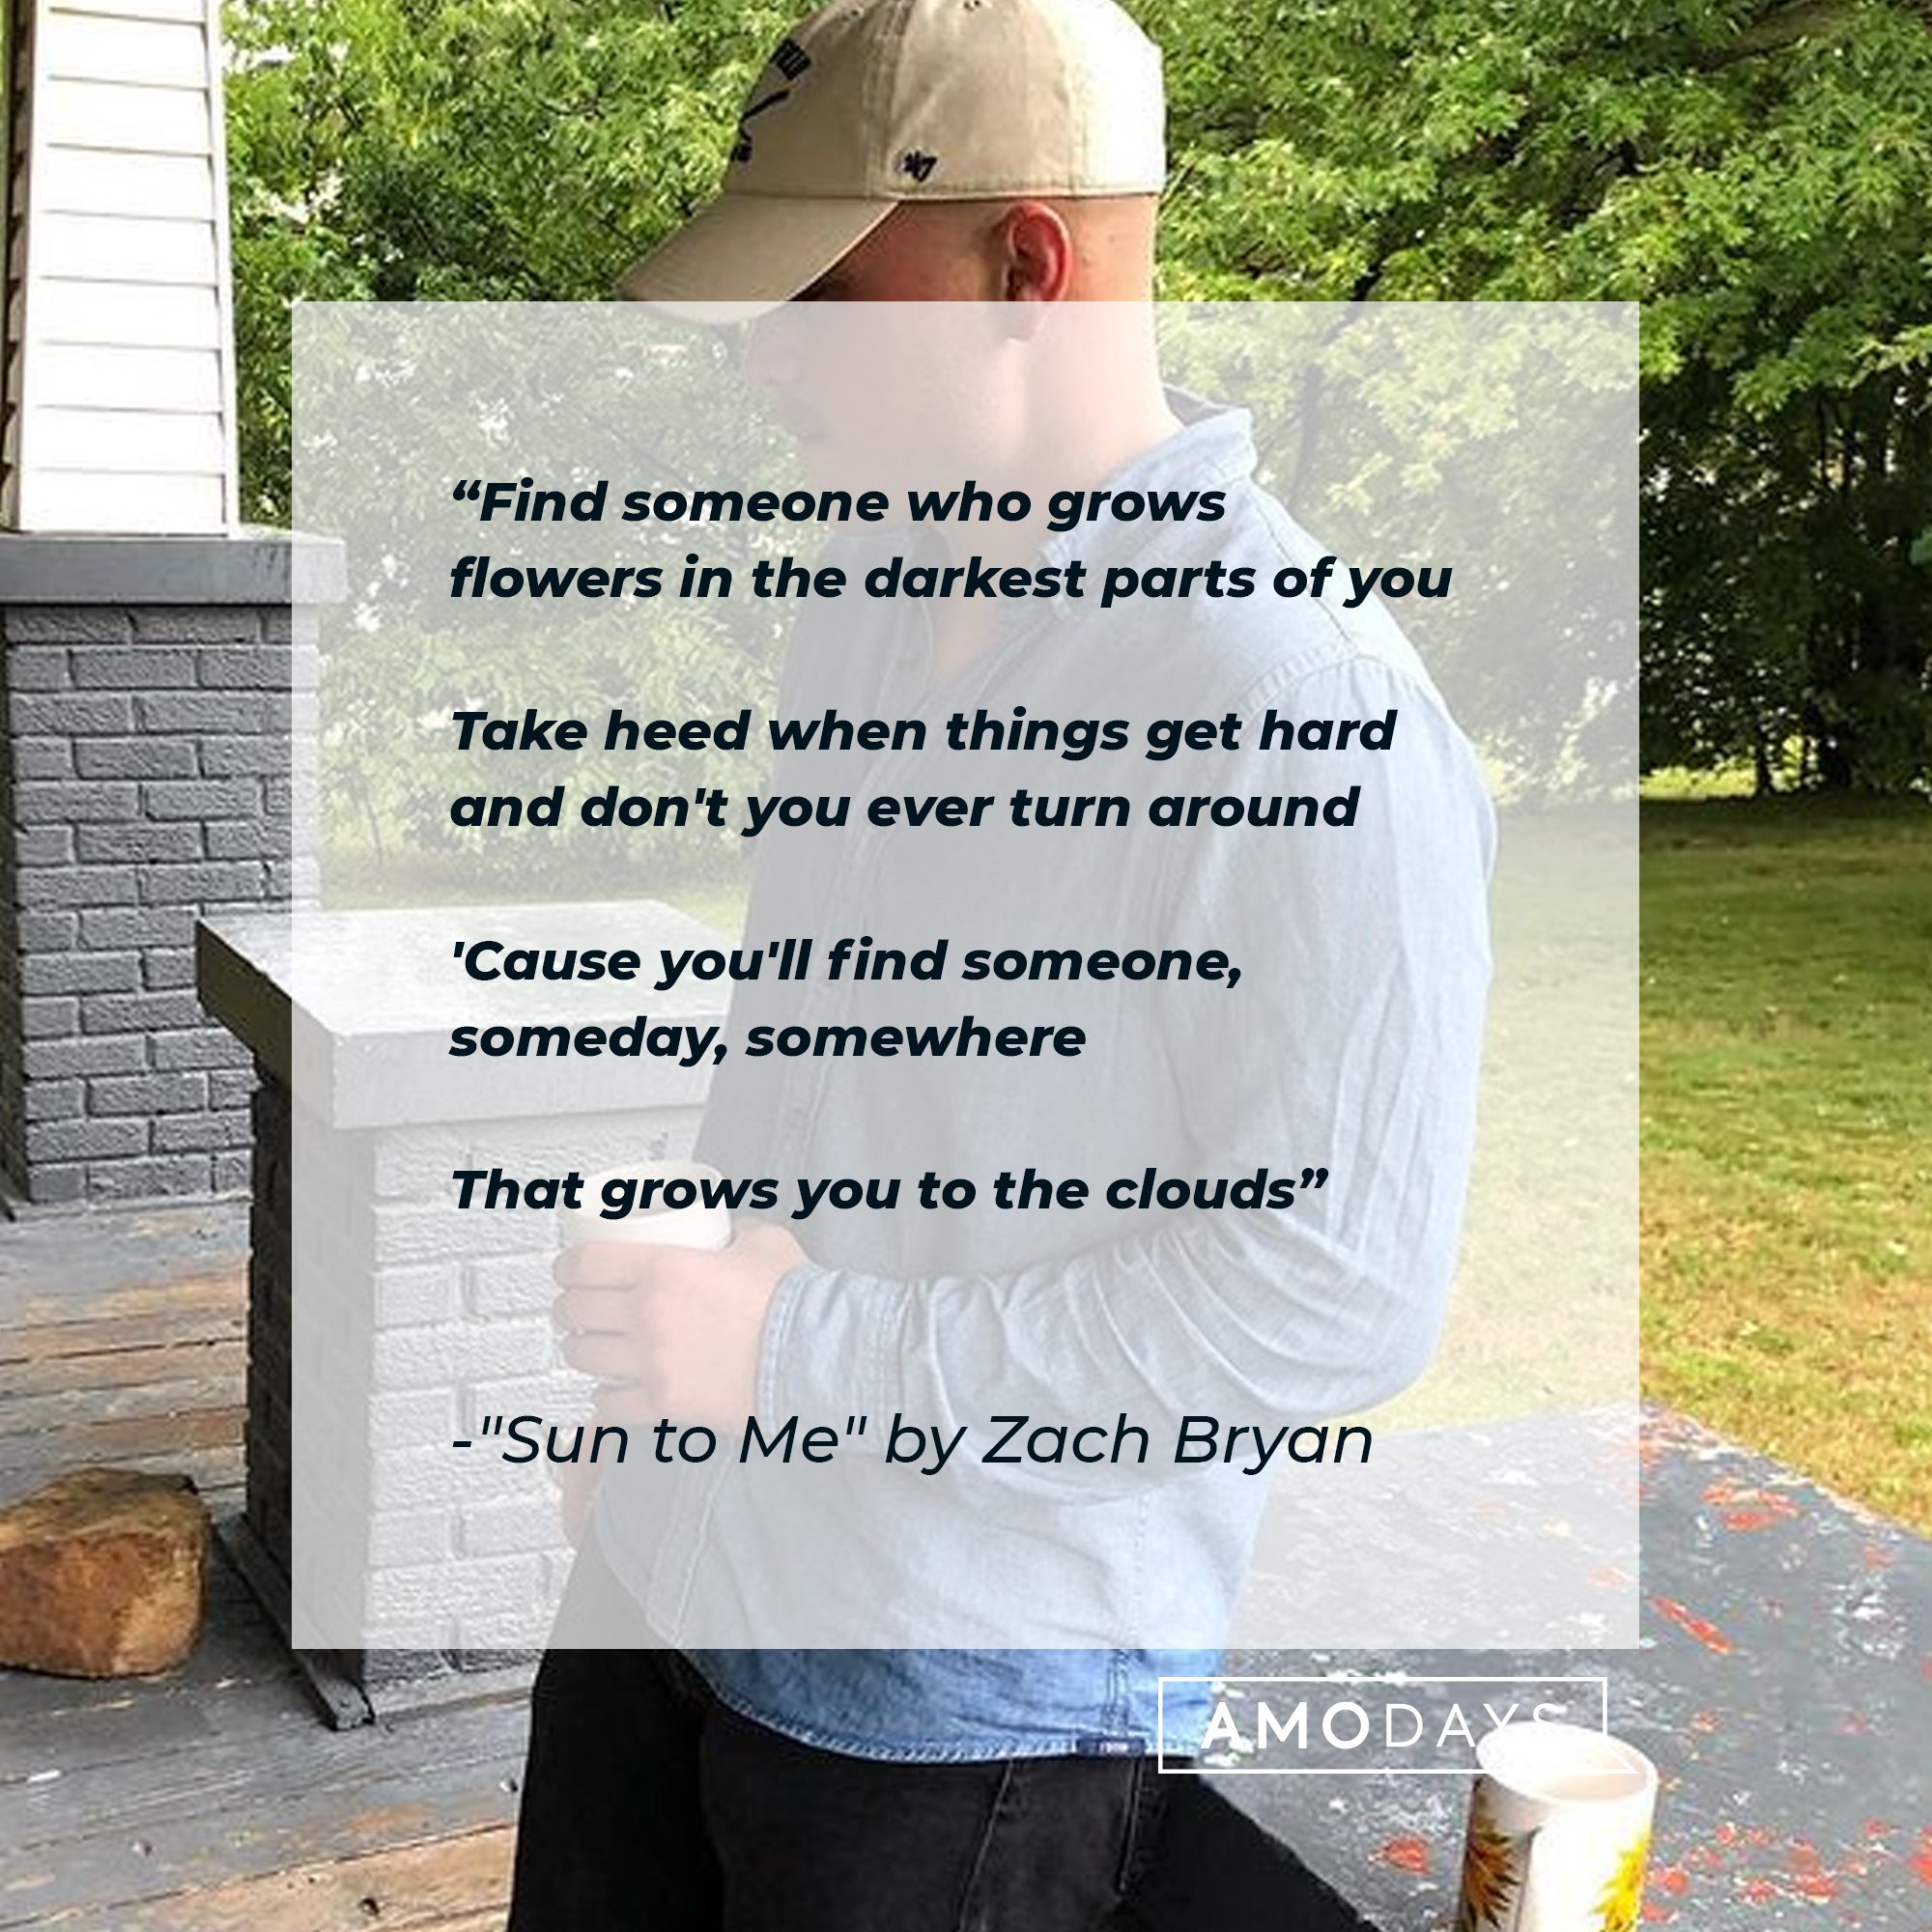 Zach Bryan’s lyrics from”Sun to Me": "Find someone who grows flowers in the darkest parts of you/ Take heed when things get hard and don't you ever turn around/ 'Cause you'll find someone, someday, somewhere/ That grows you to the clouds”